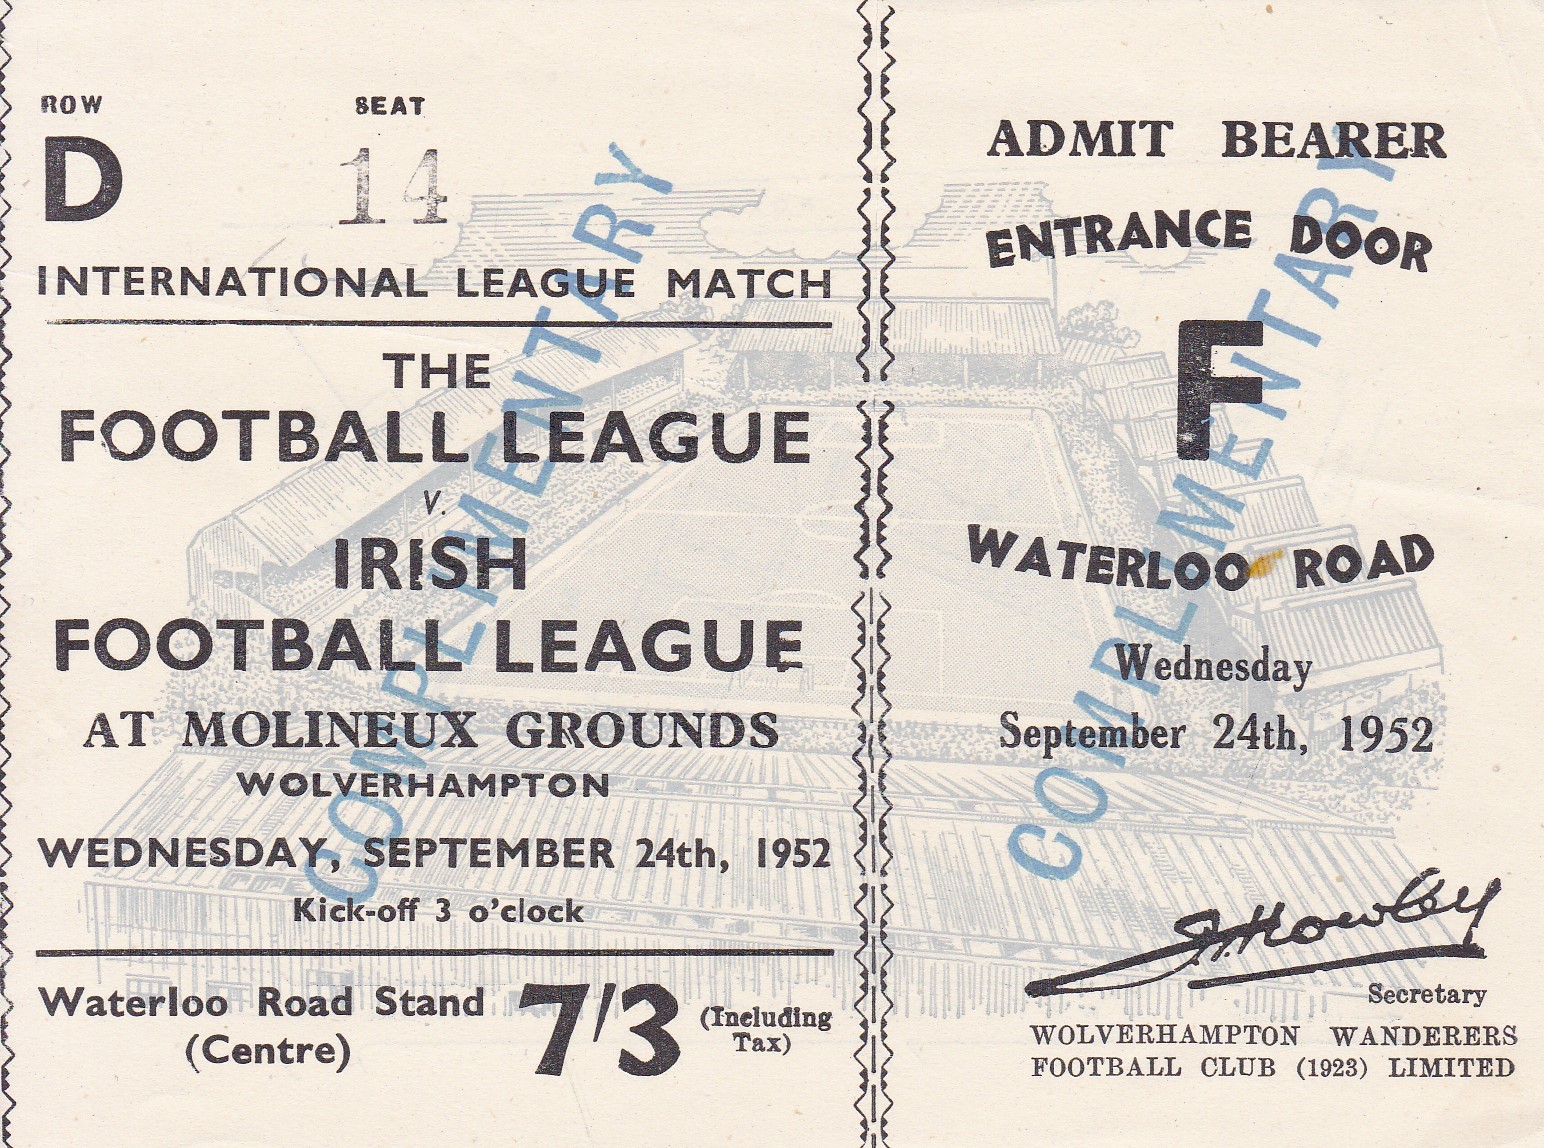 TICKET-1952 - WOLVES Ticket complete with counterfoil, Football League v Irish League, 24/9/52 at - Image 3 of 3